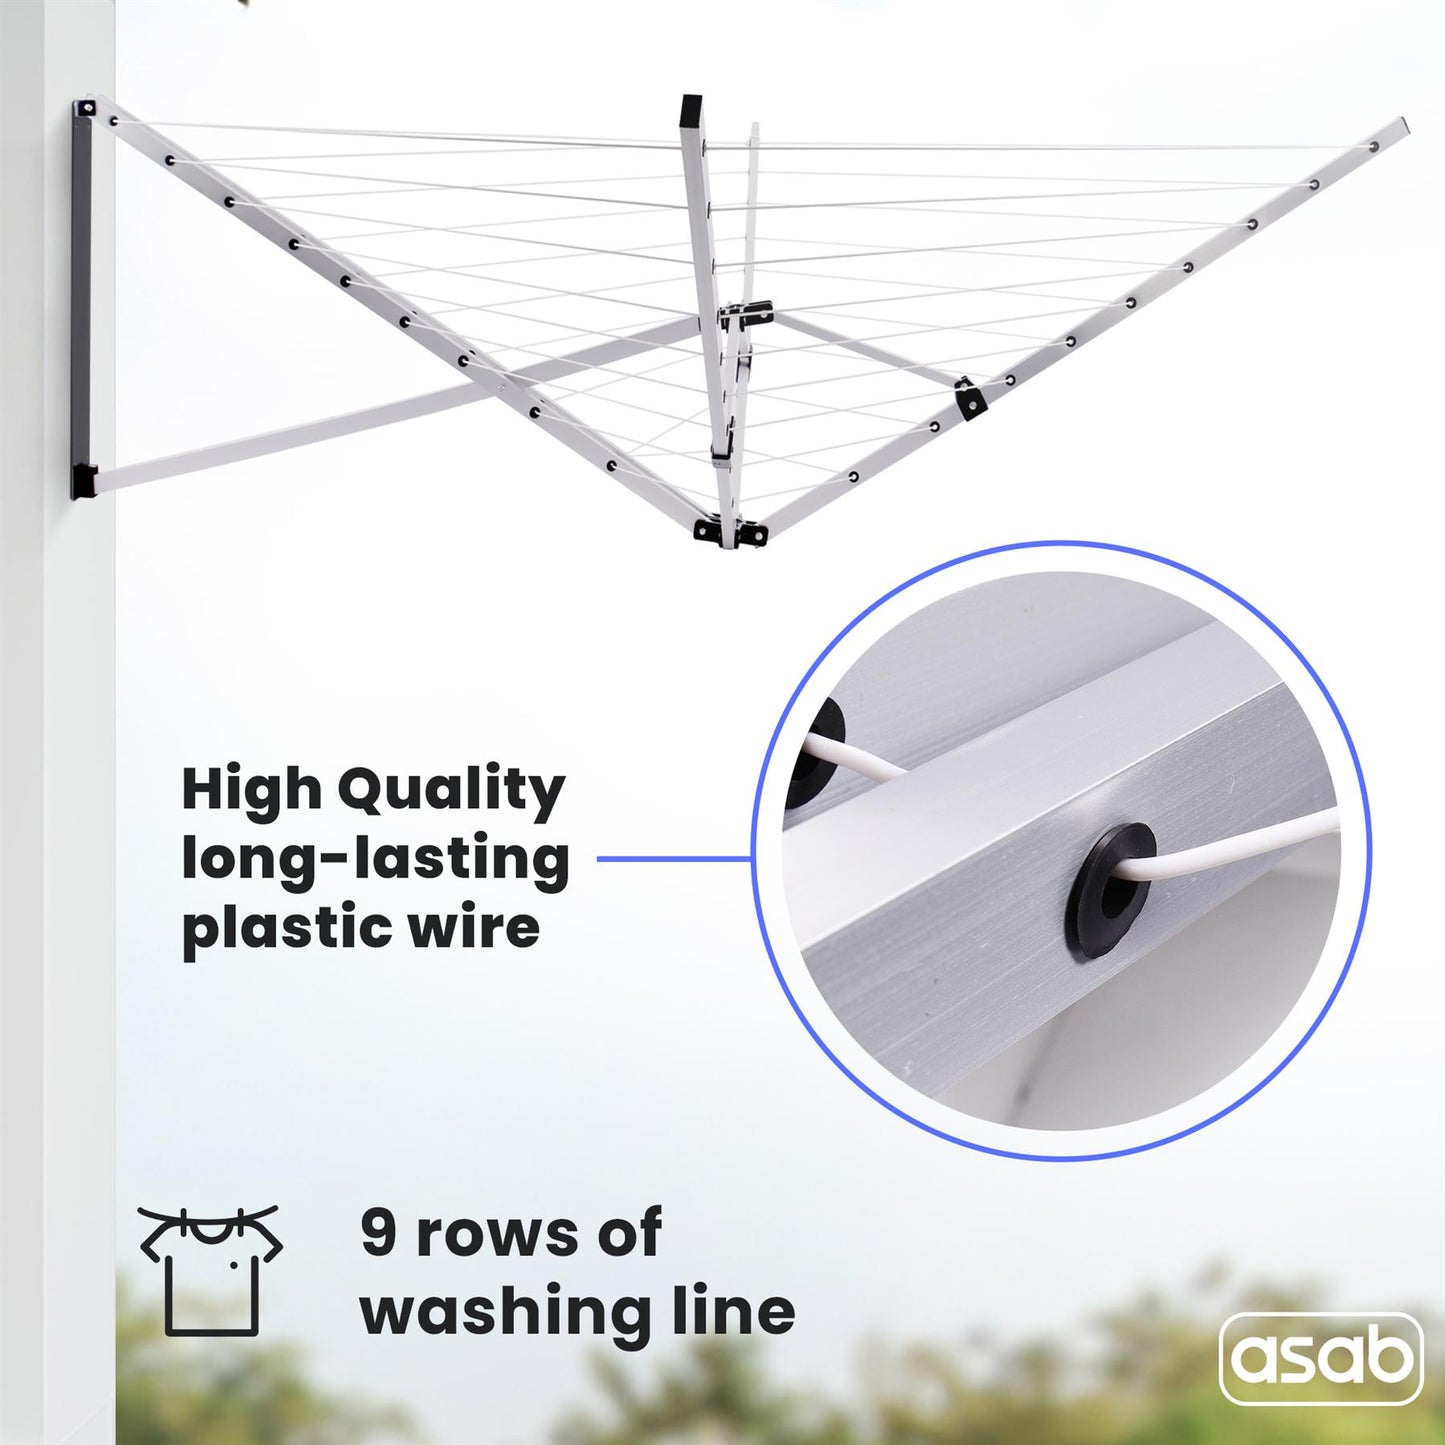 5-Arm Folding Laundry Drying Rack For Indoor & Outdoor Use